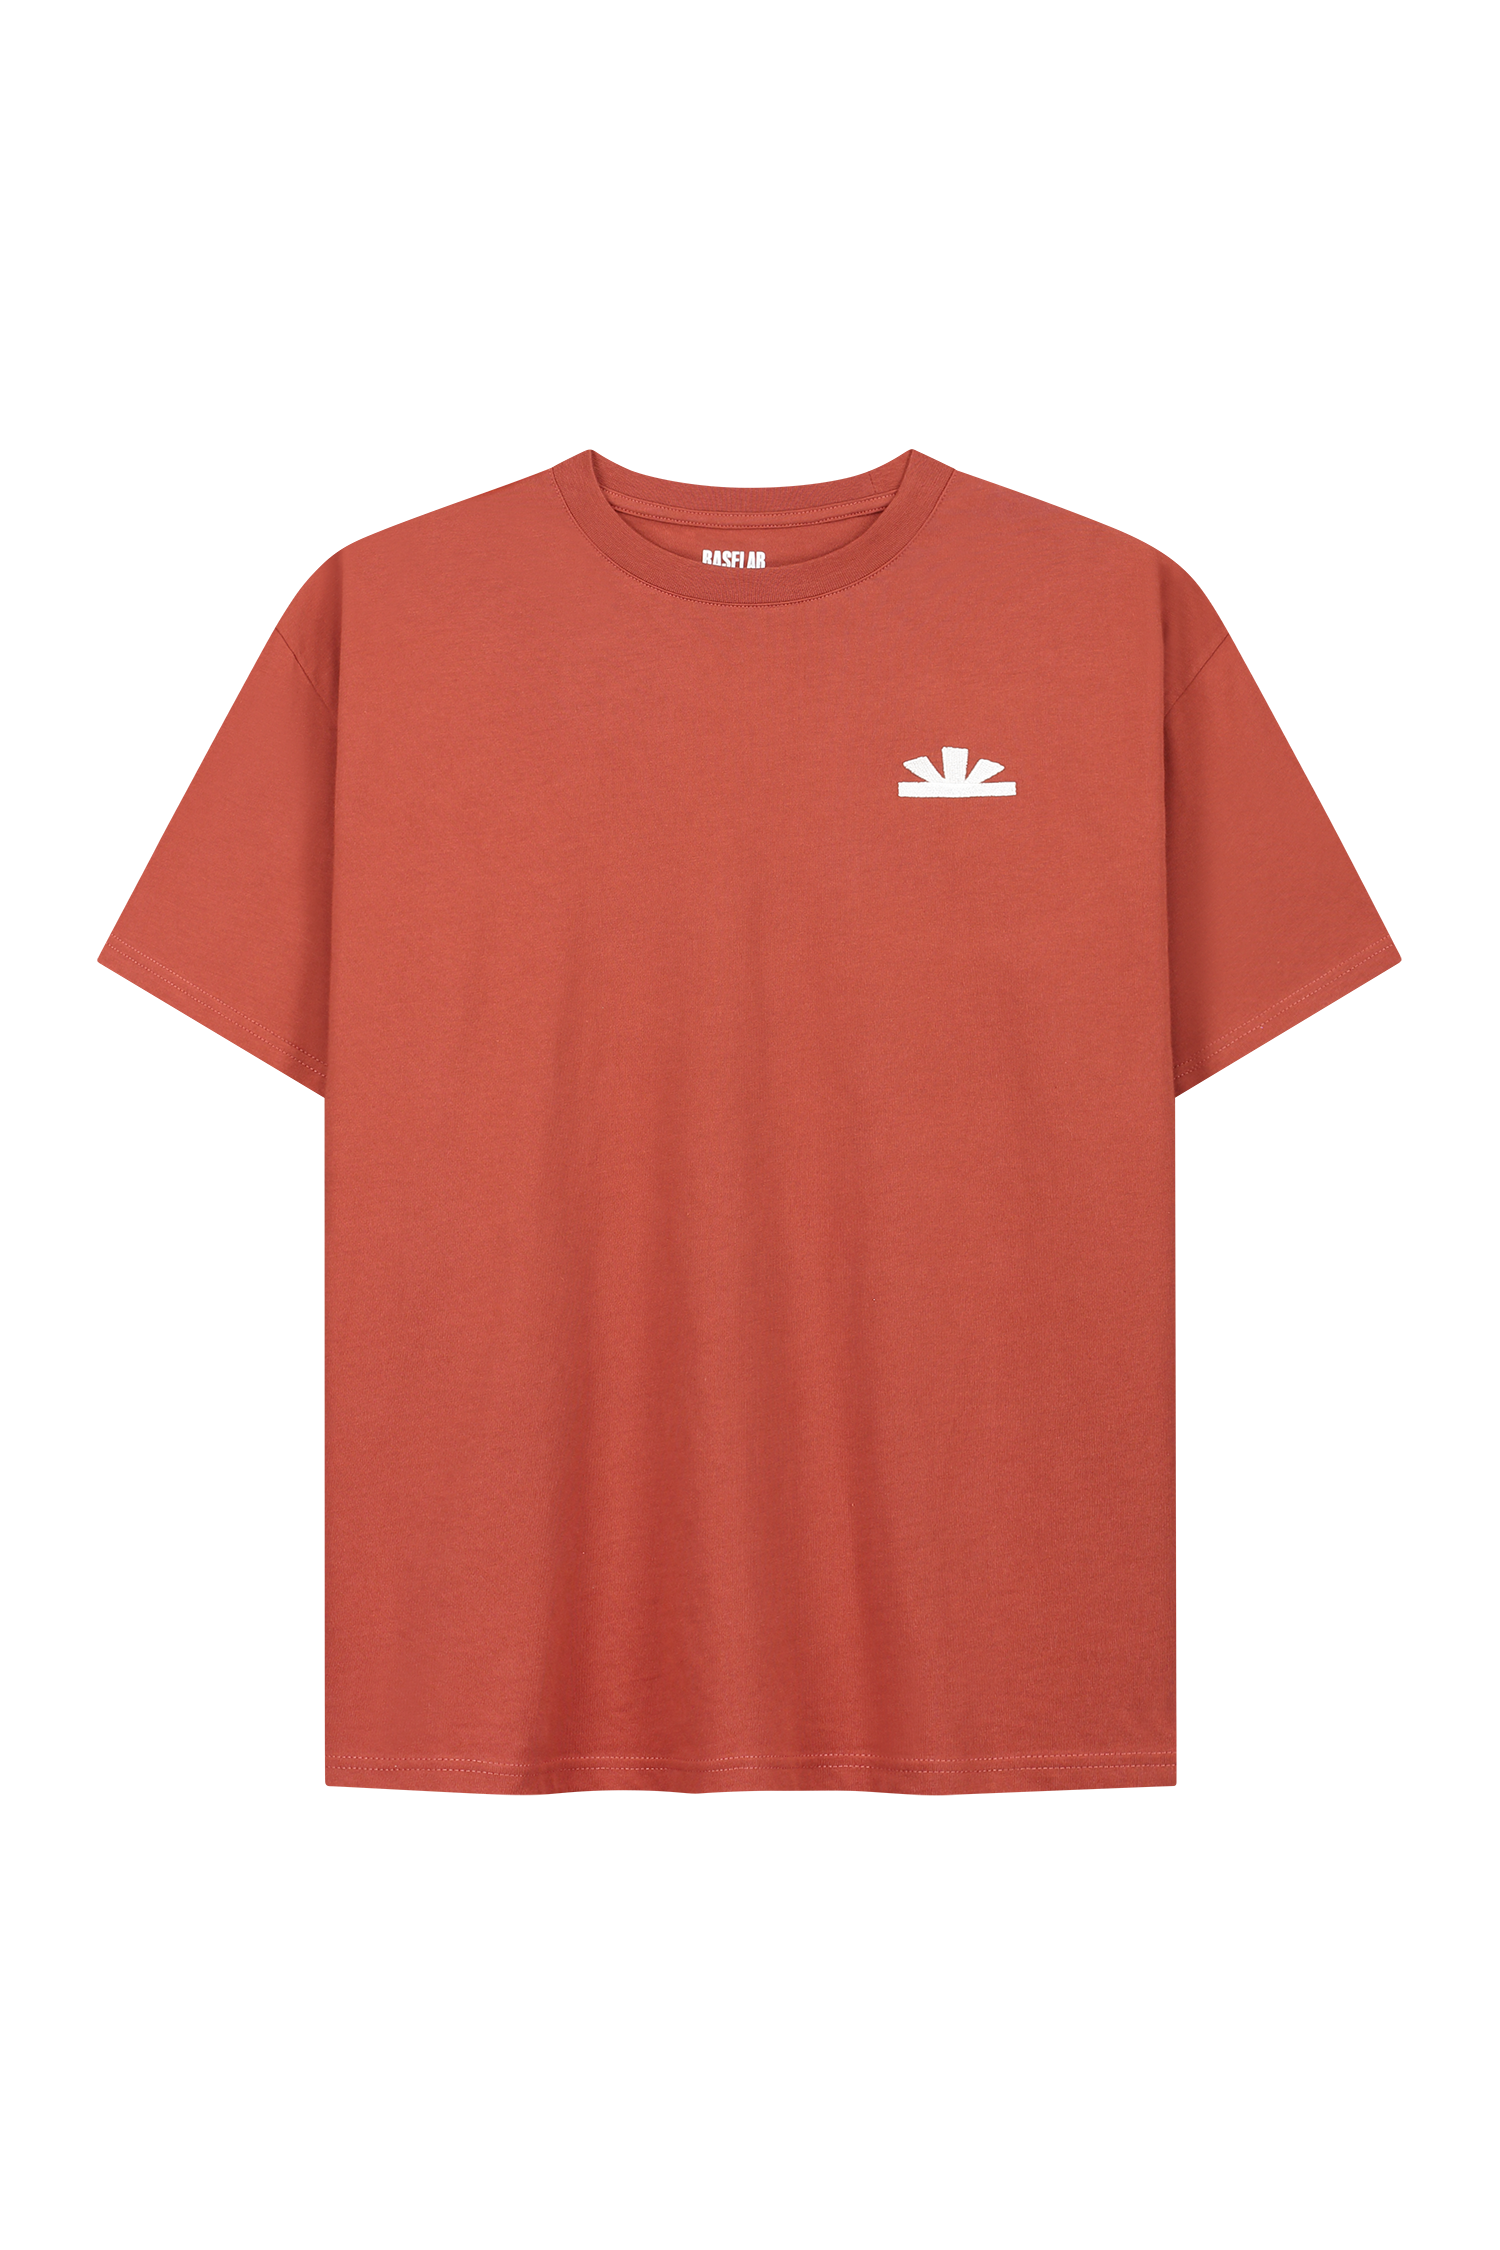 New Dawn T-shirt burned red